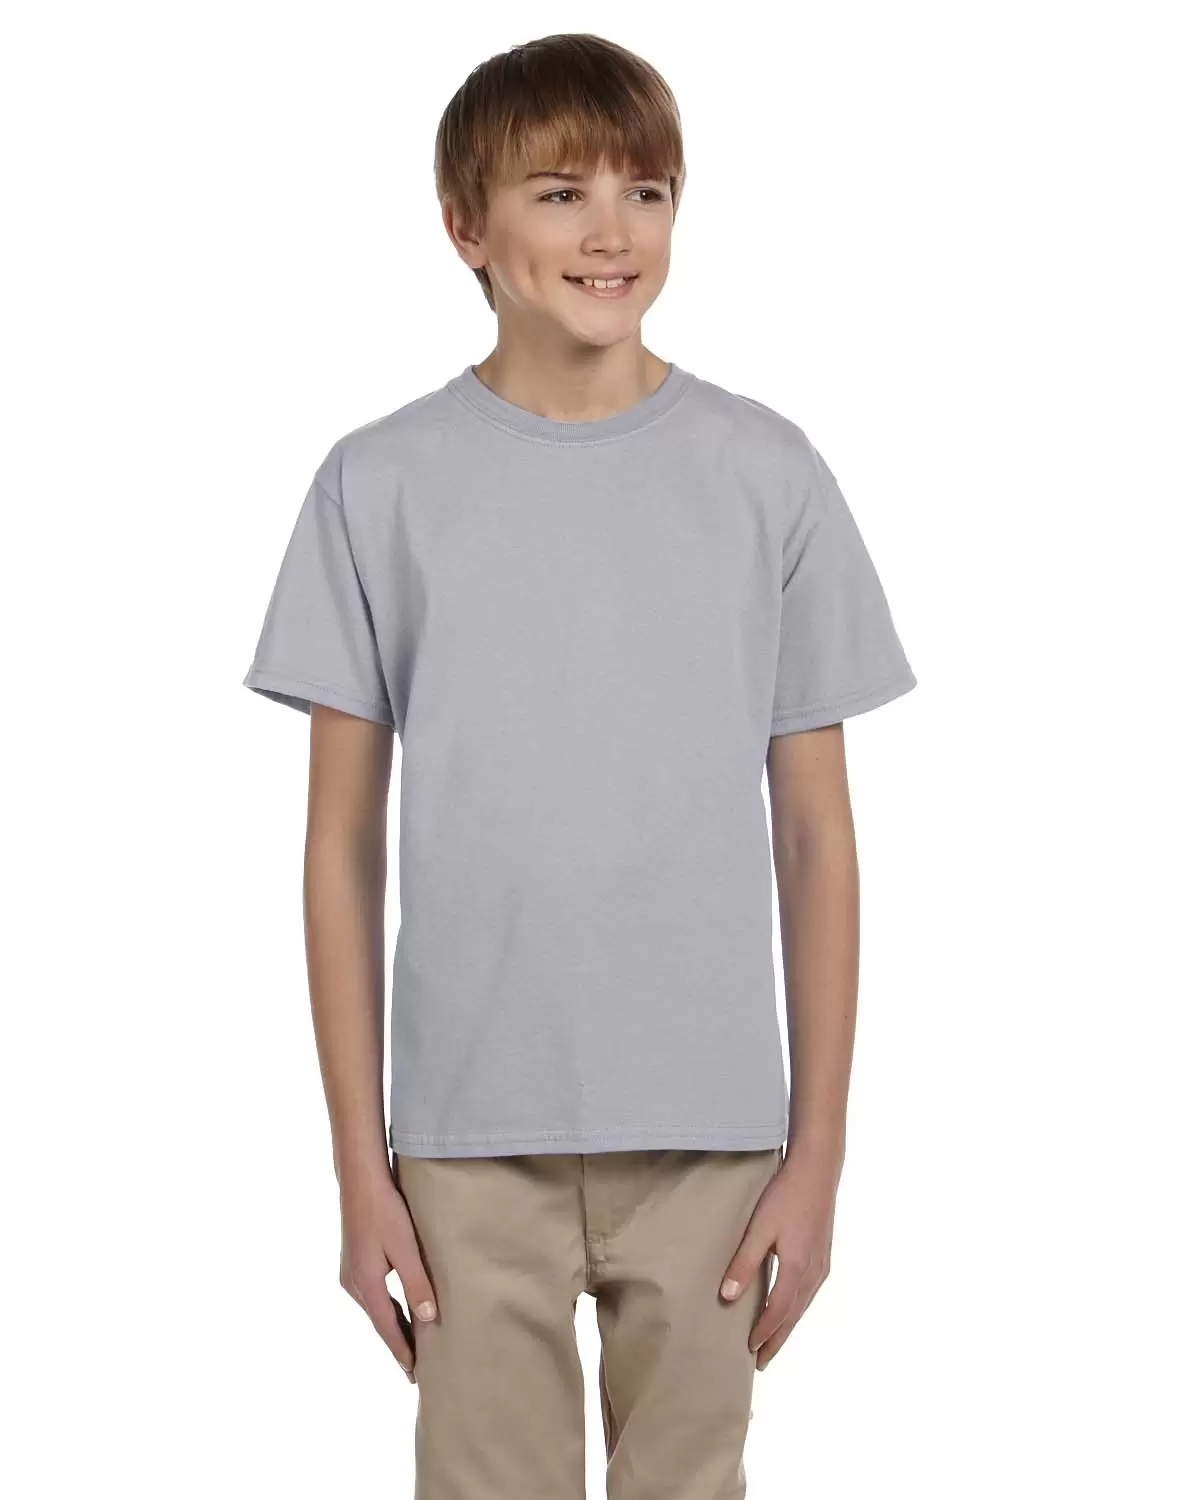 3931B Fruit of the Loom Youth 5.6 oz. Cotton T-Shirt Heather - From $2.56